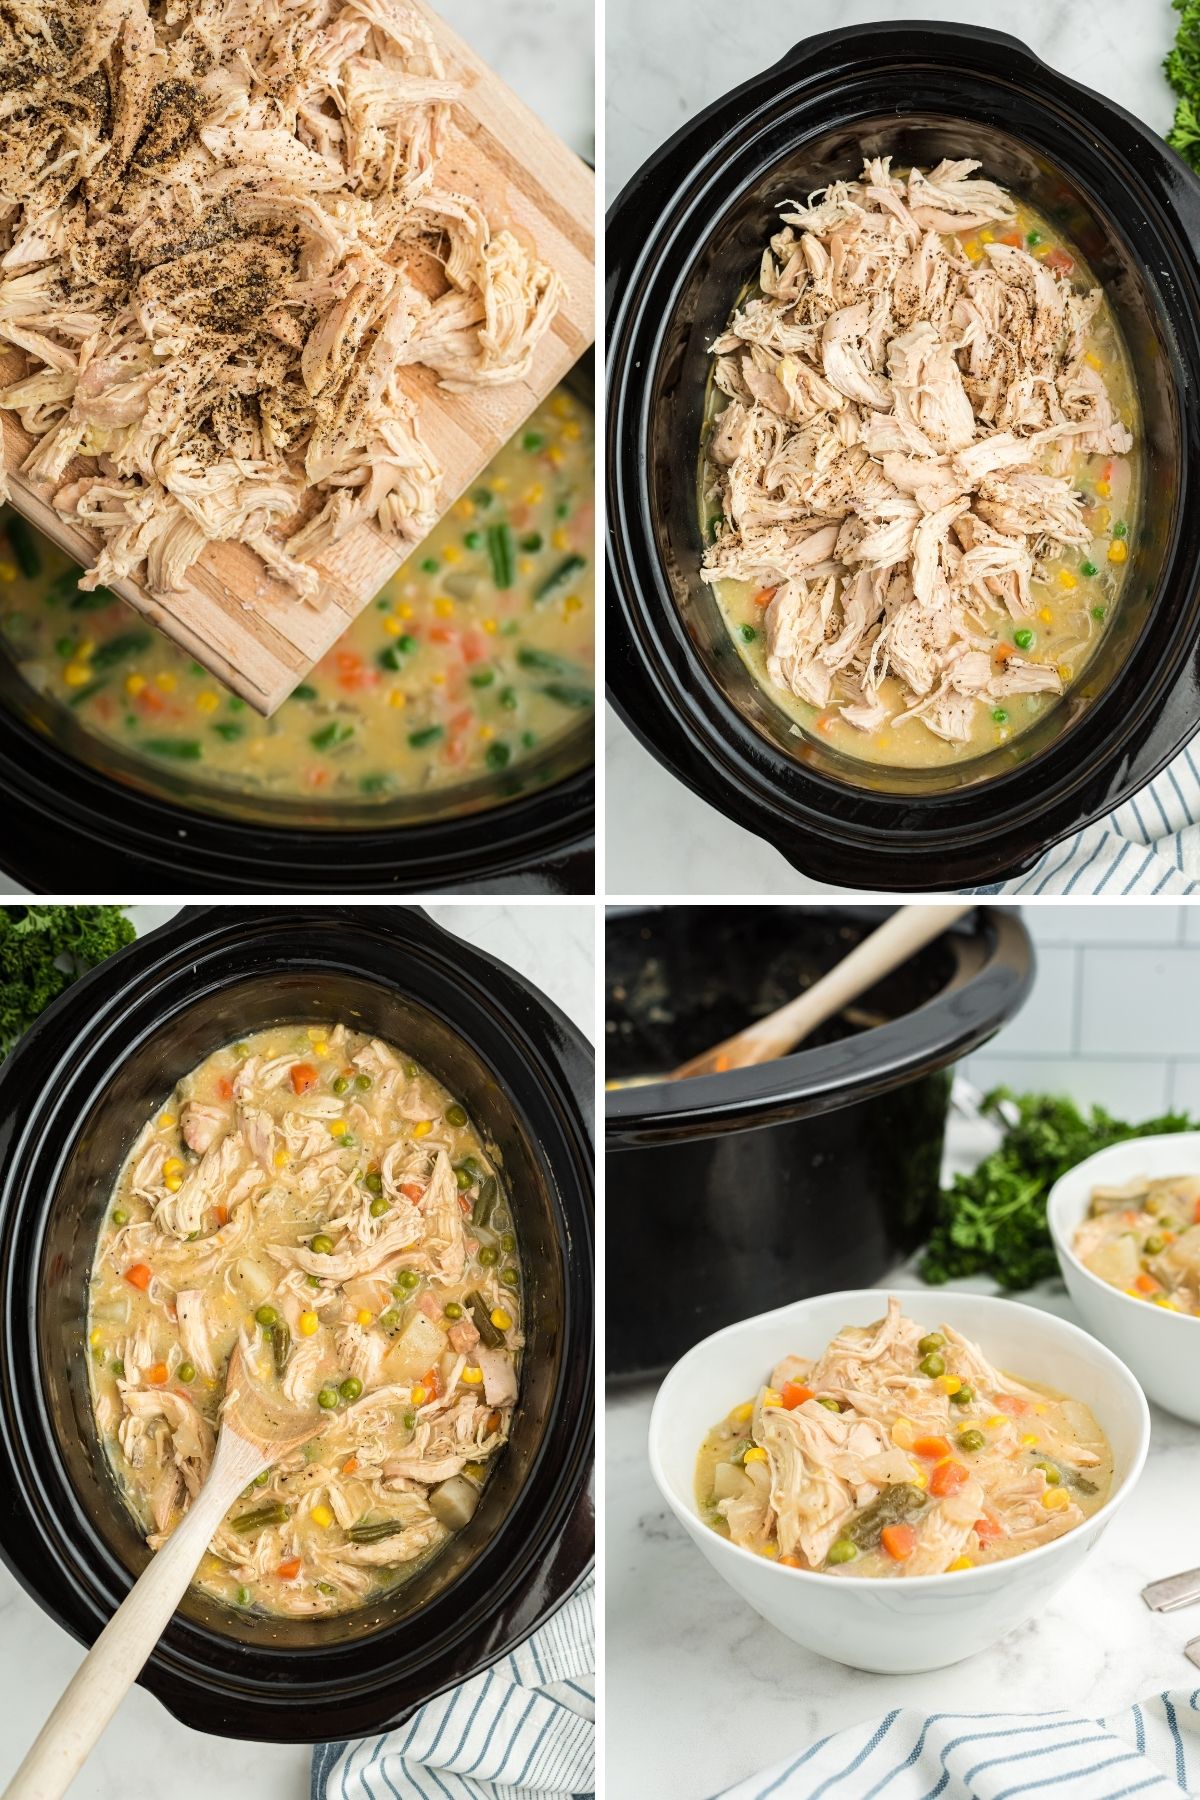 four photos of process: cutting board with shredded chicken; shredded chicken in crockpot; wooden spoon stirring mixture; bowl of chicken pot pie next to crockpot